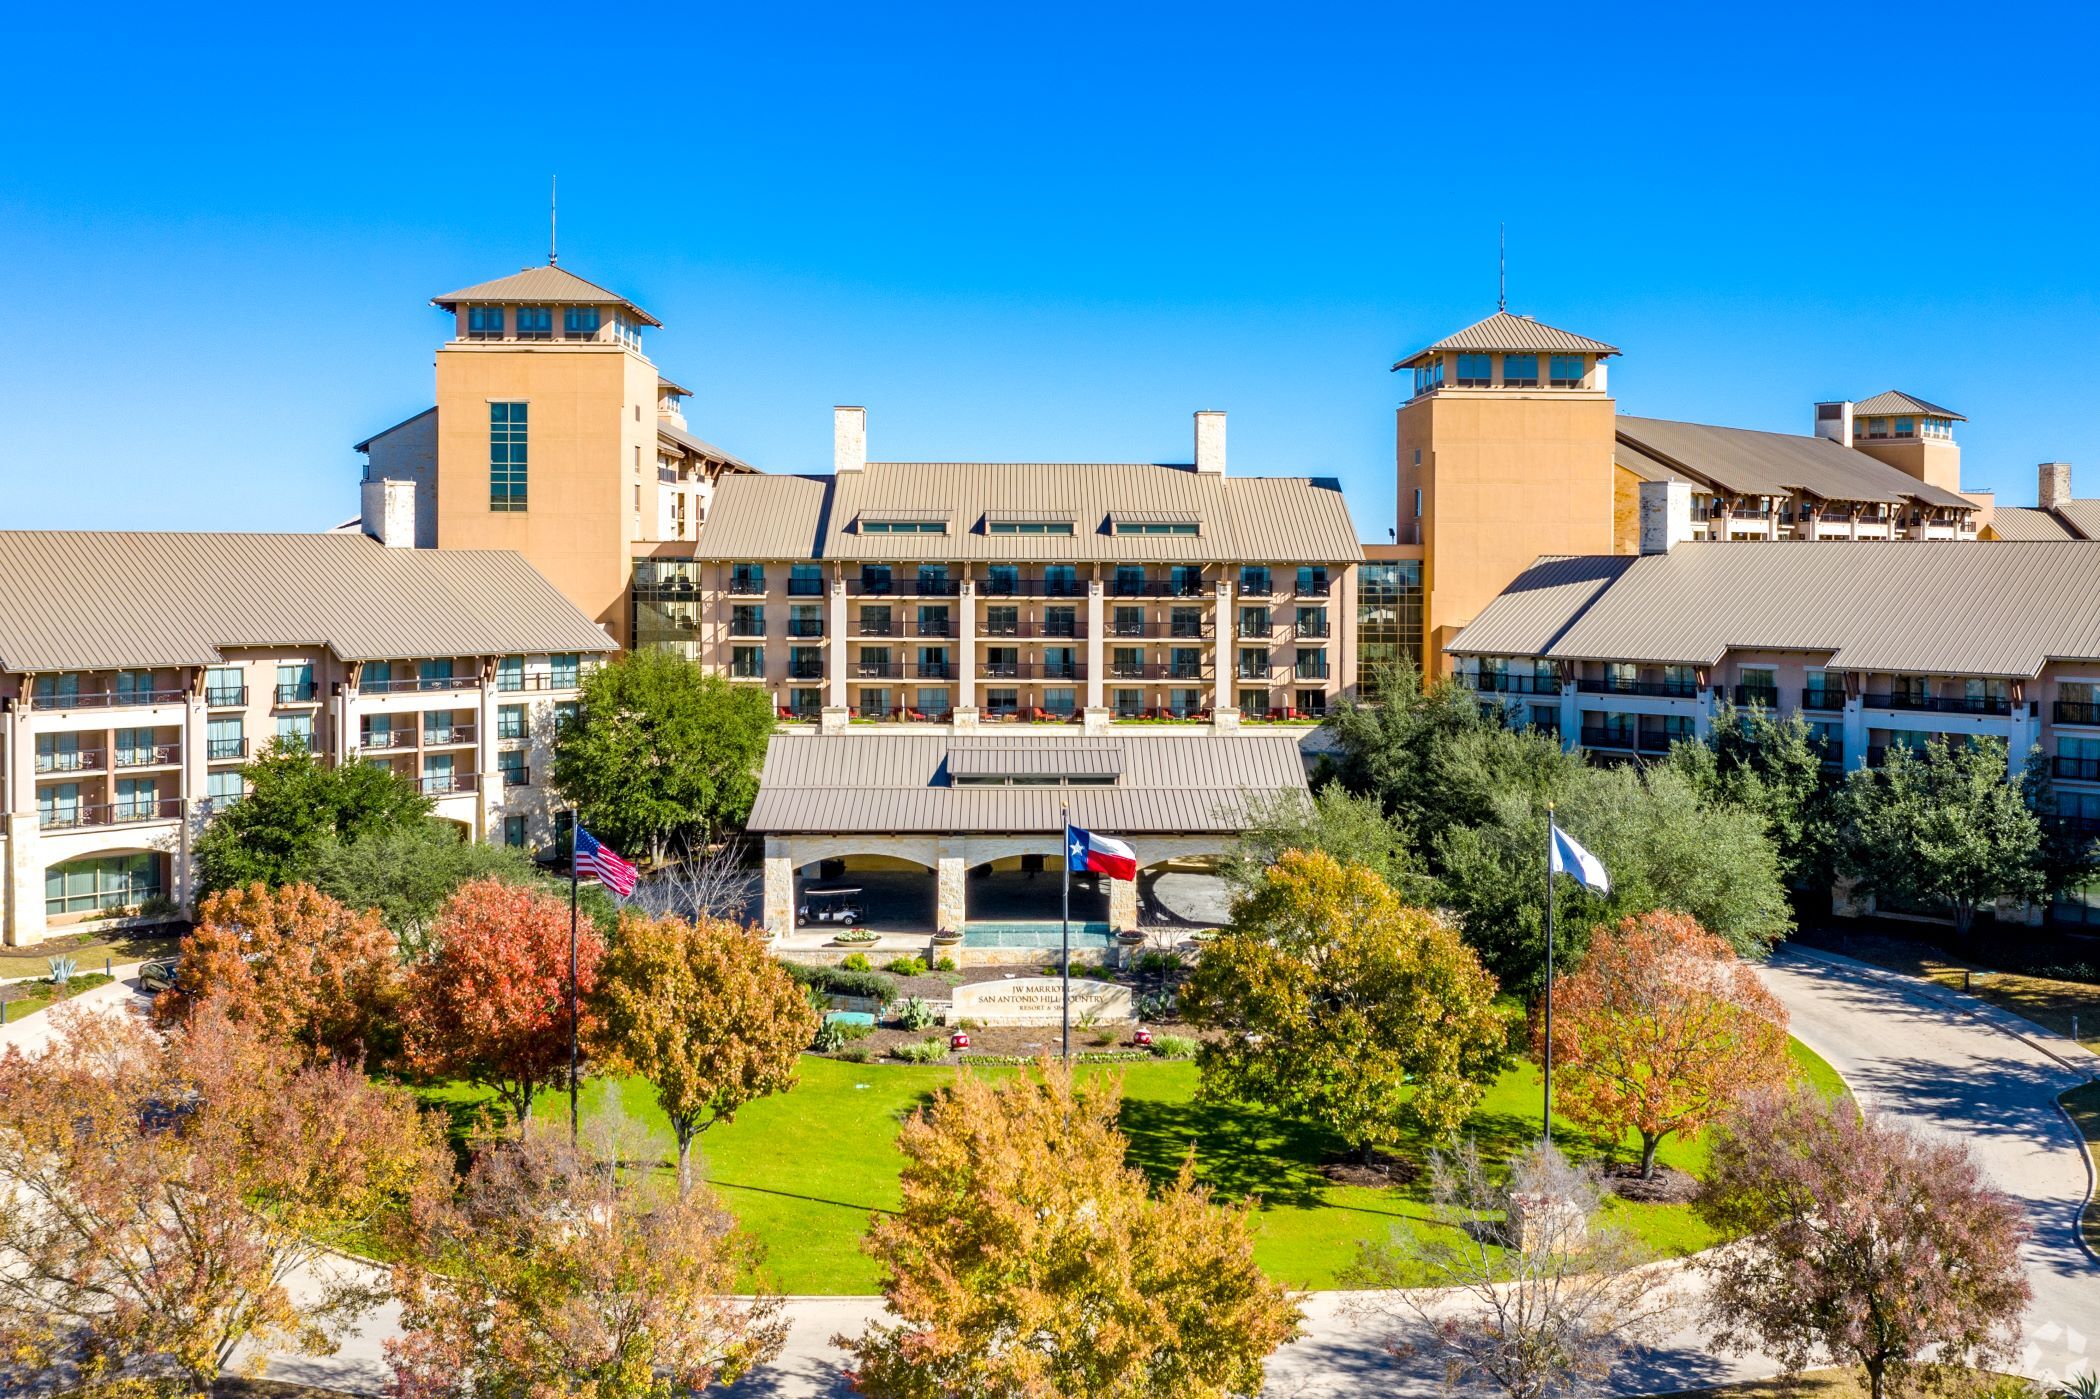 Nashville, Tennessee-based Ryman Hospitality Properties has acquired the JW Marriott San Antonio Hill Country Resort &amp; Spa from Blackstone REIT for $800 million. (CoStar)